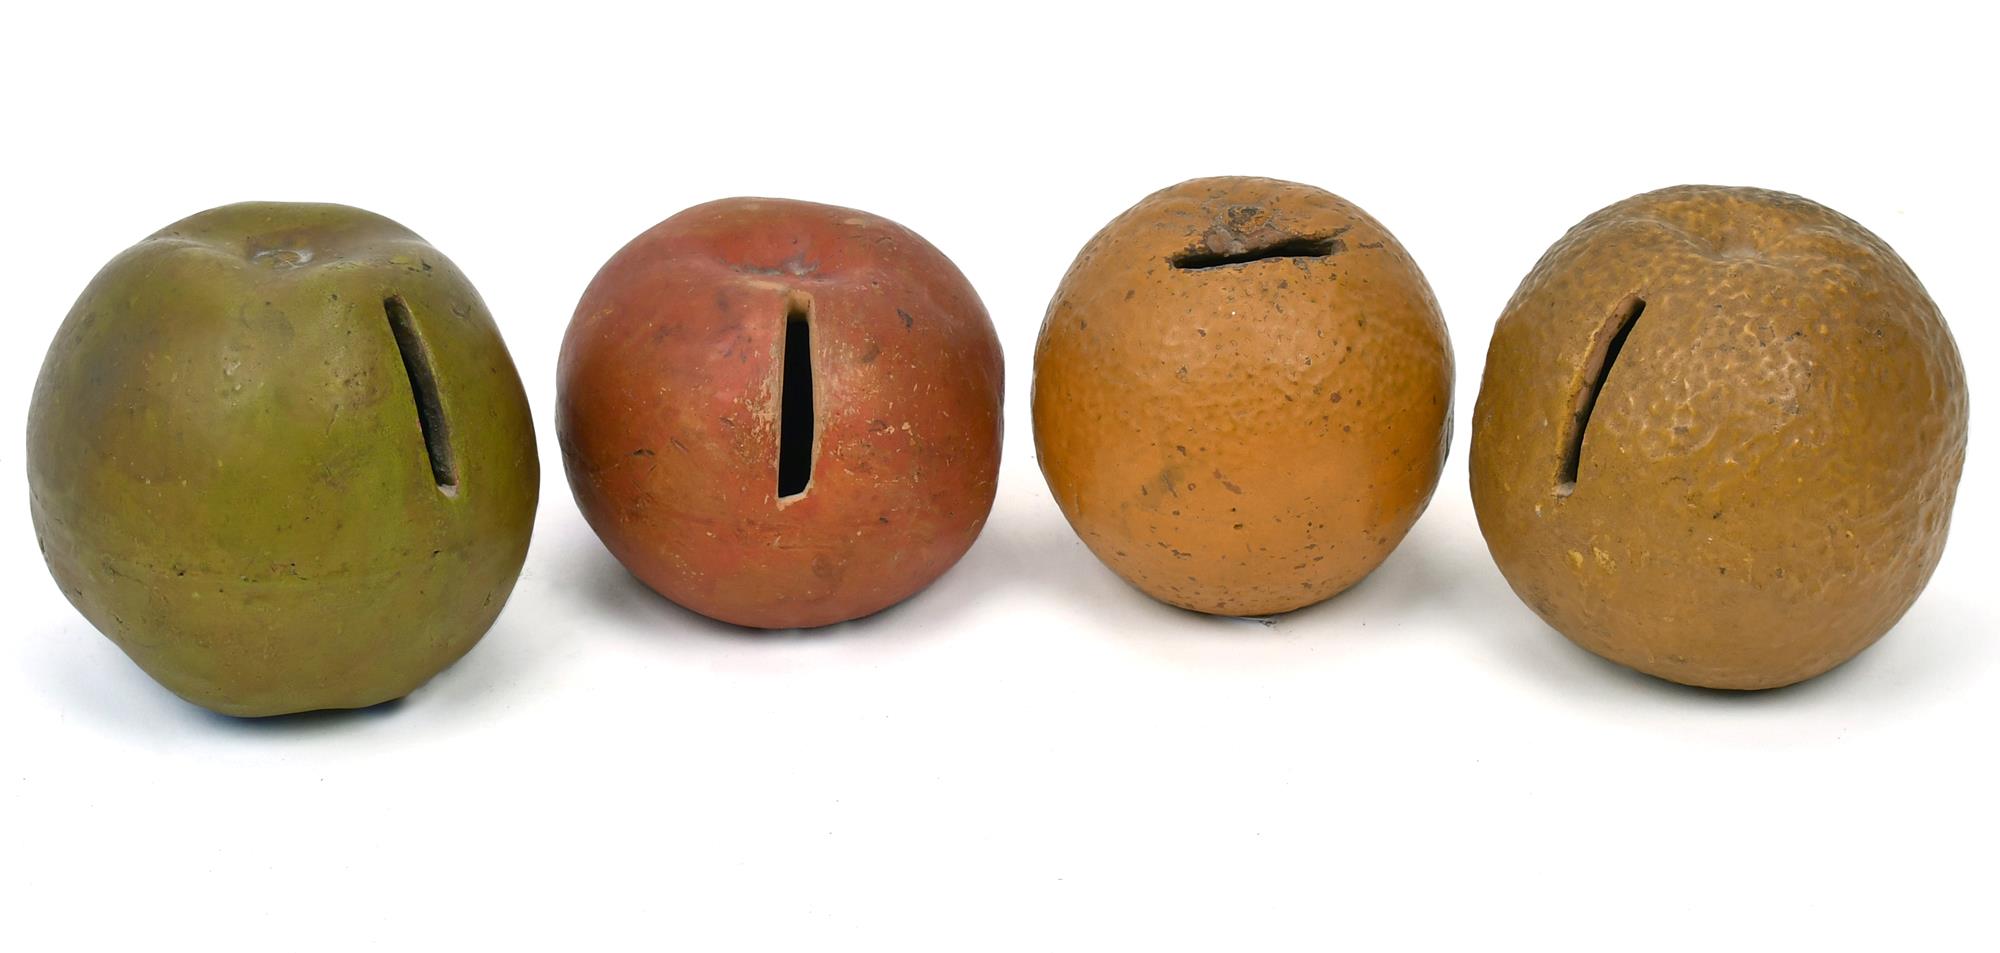 FOUR 19TH C. REDWARE FRUIT BANKS. A